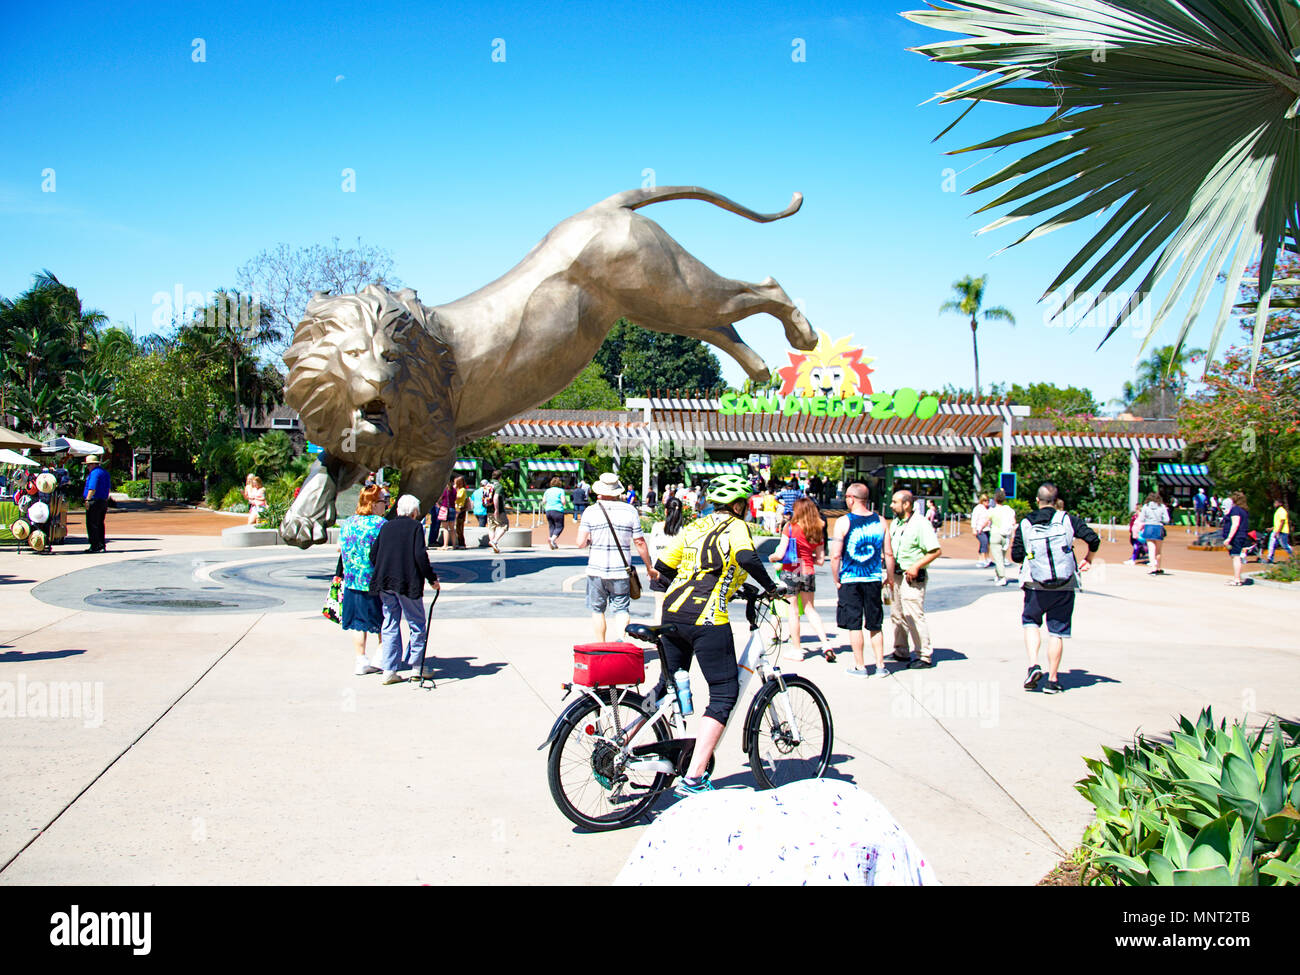 Lion sculpture at entrance to San Diego Zoo with people Stock Photo